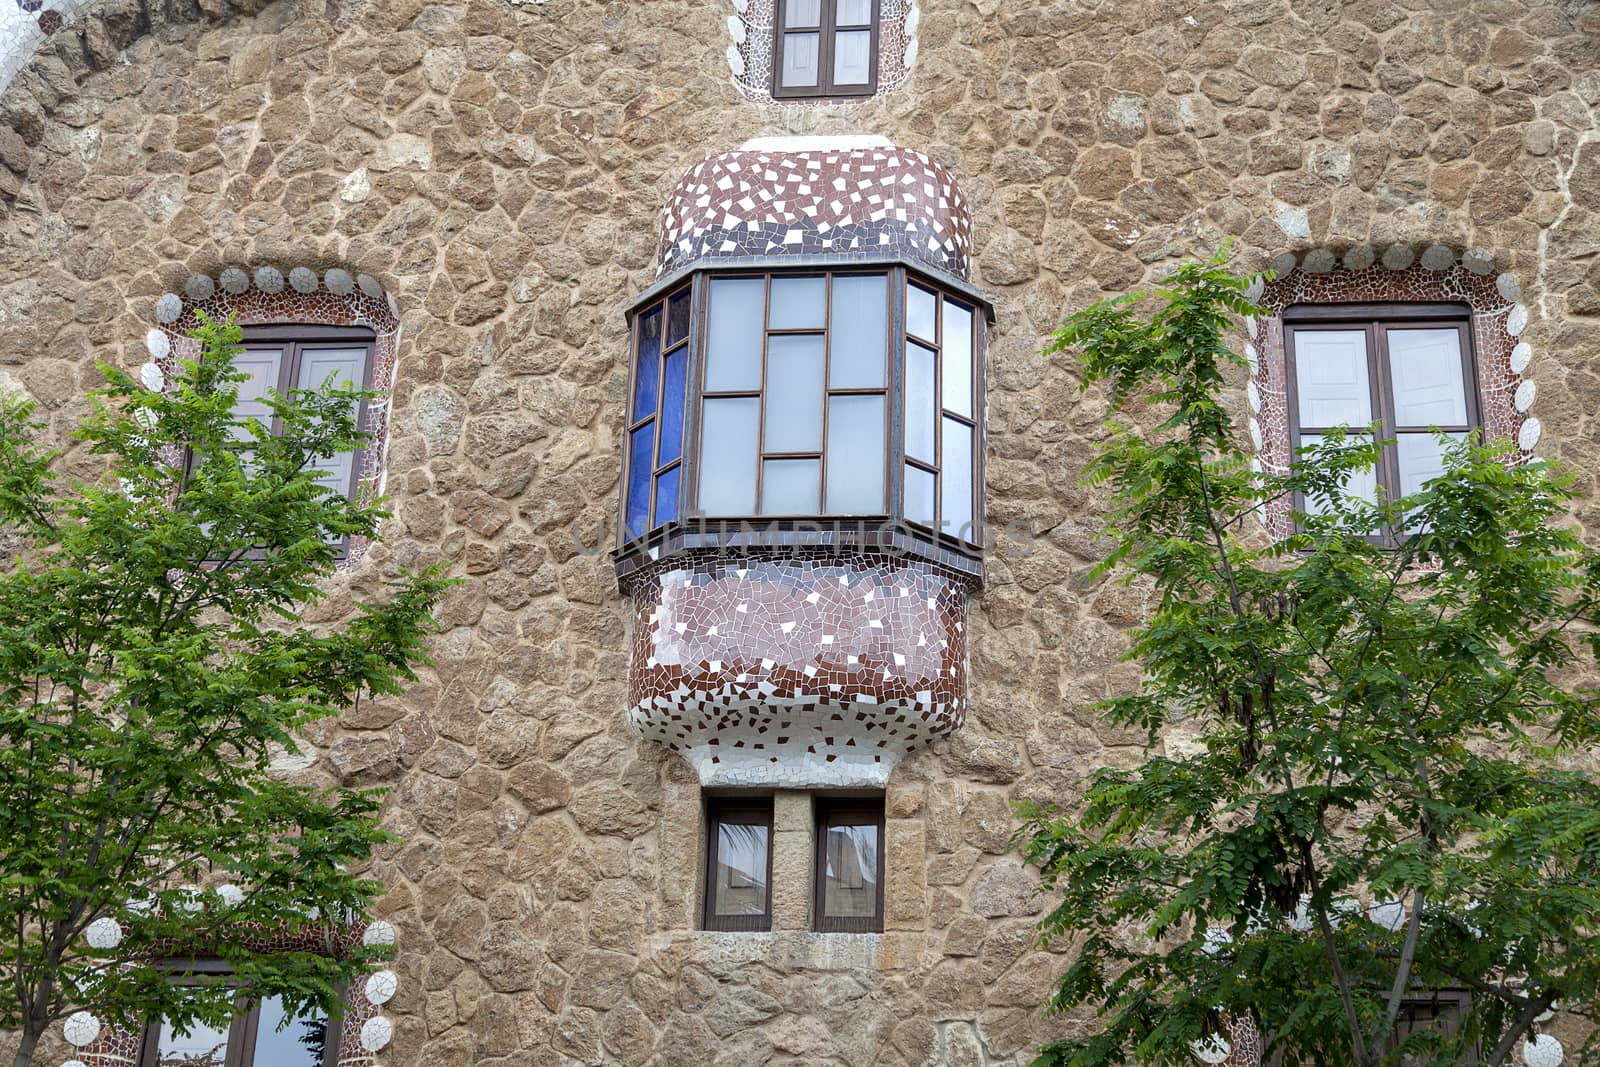 Gingerbread house by Gaudi in Park Guell, Barcelona, Spain by mychadre77